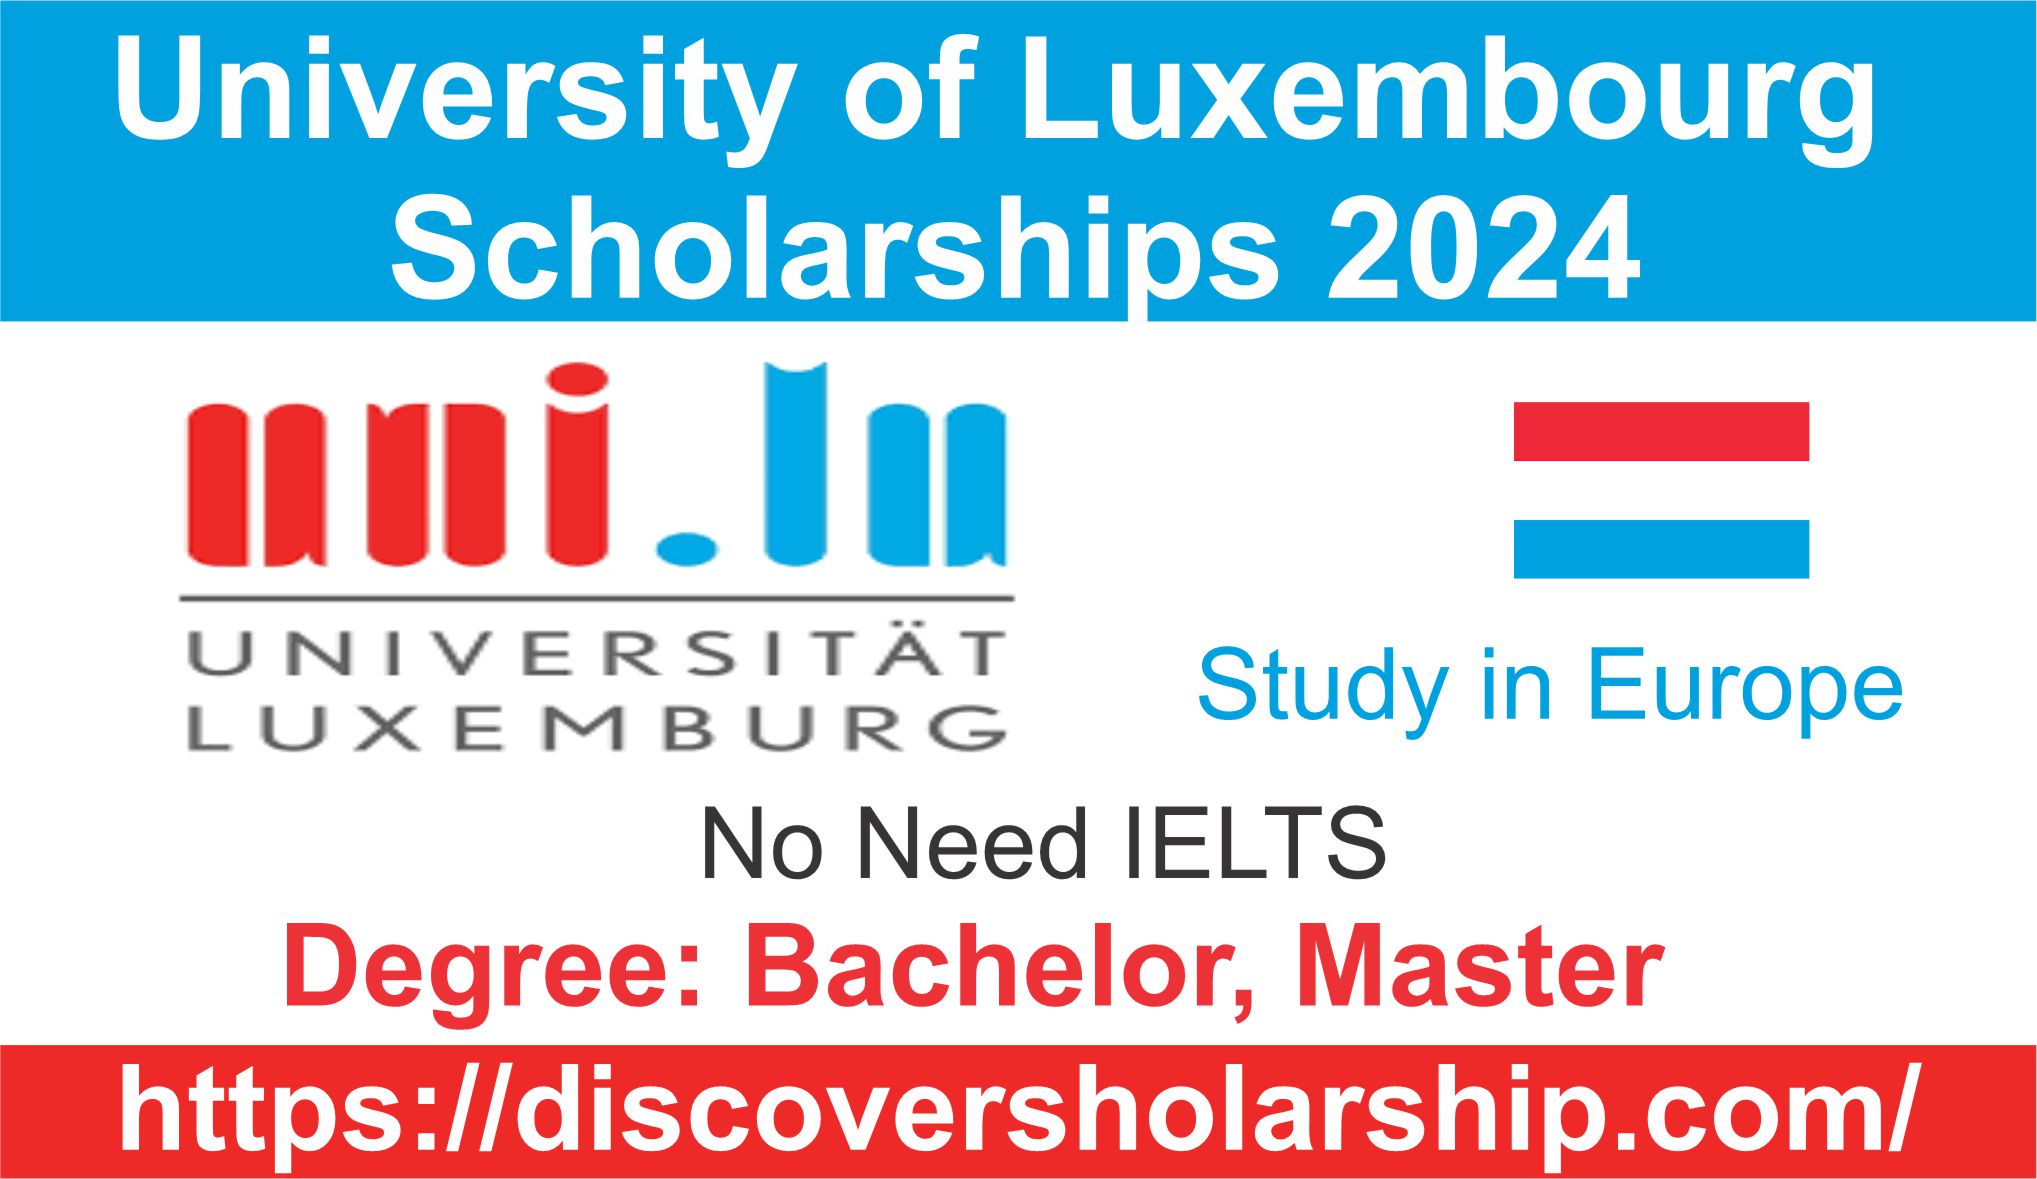 University of Luxembourg Scholarships 2024 without IELTS – Study in Europe